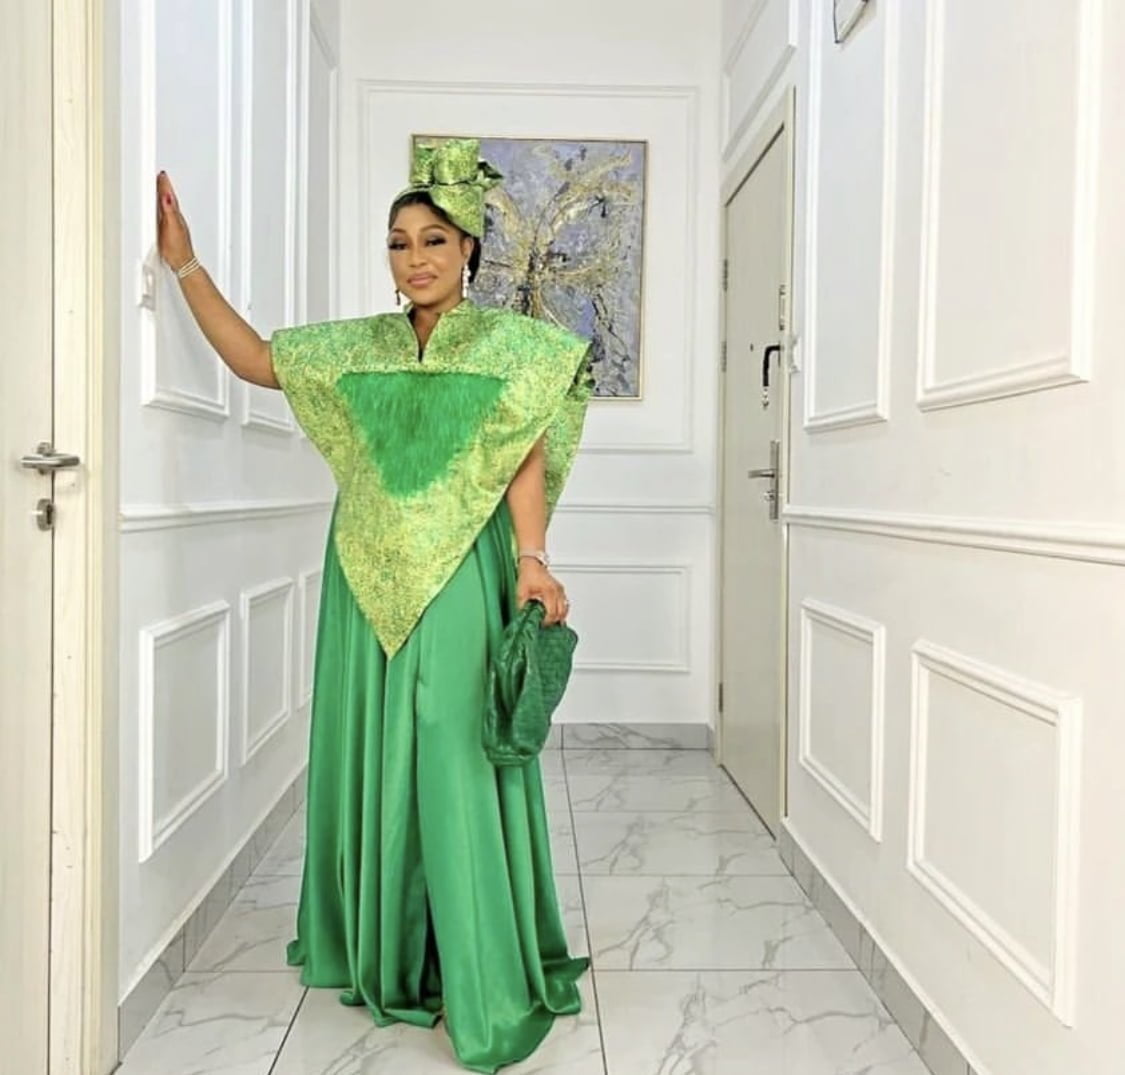 Rita Dominic in an envy-worthy green ensemble, playing with shades and creating a fashion masterpiece.